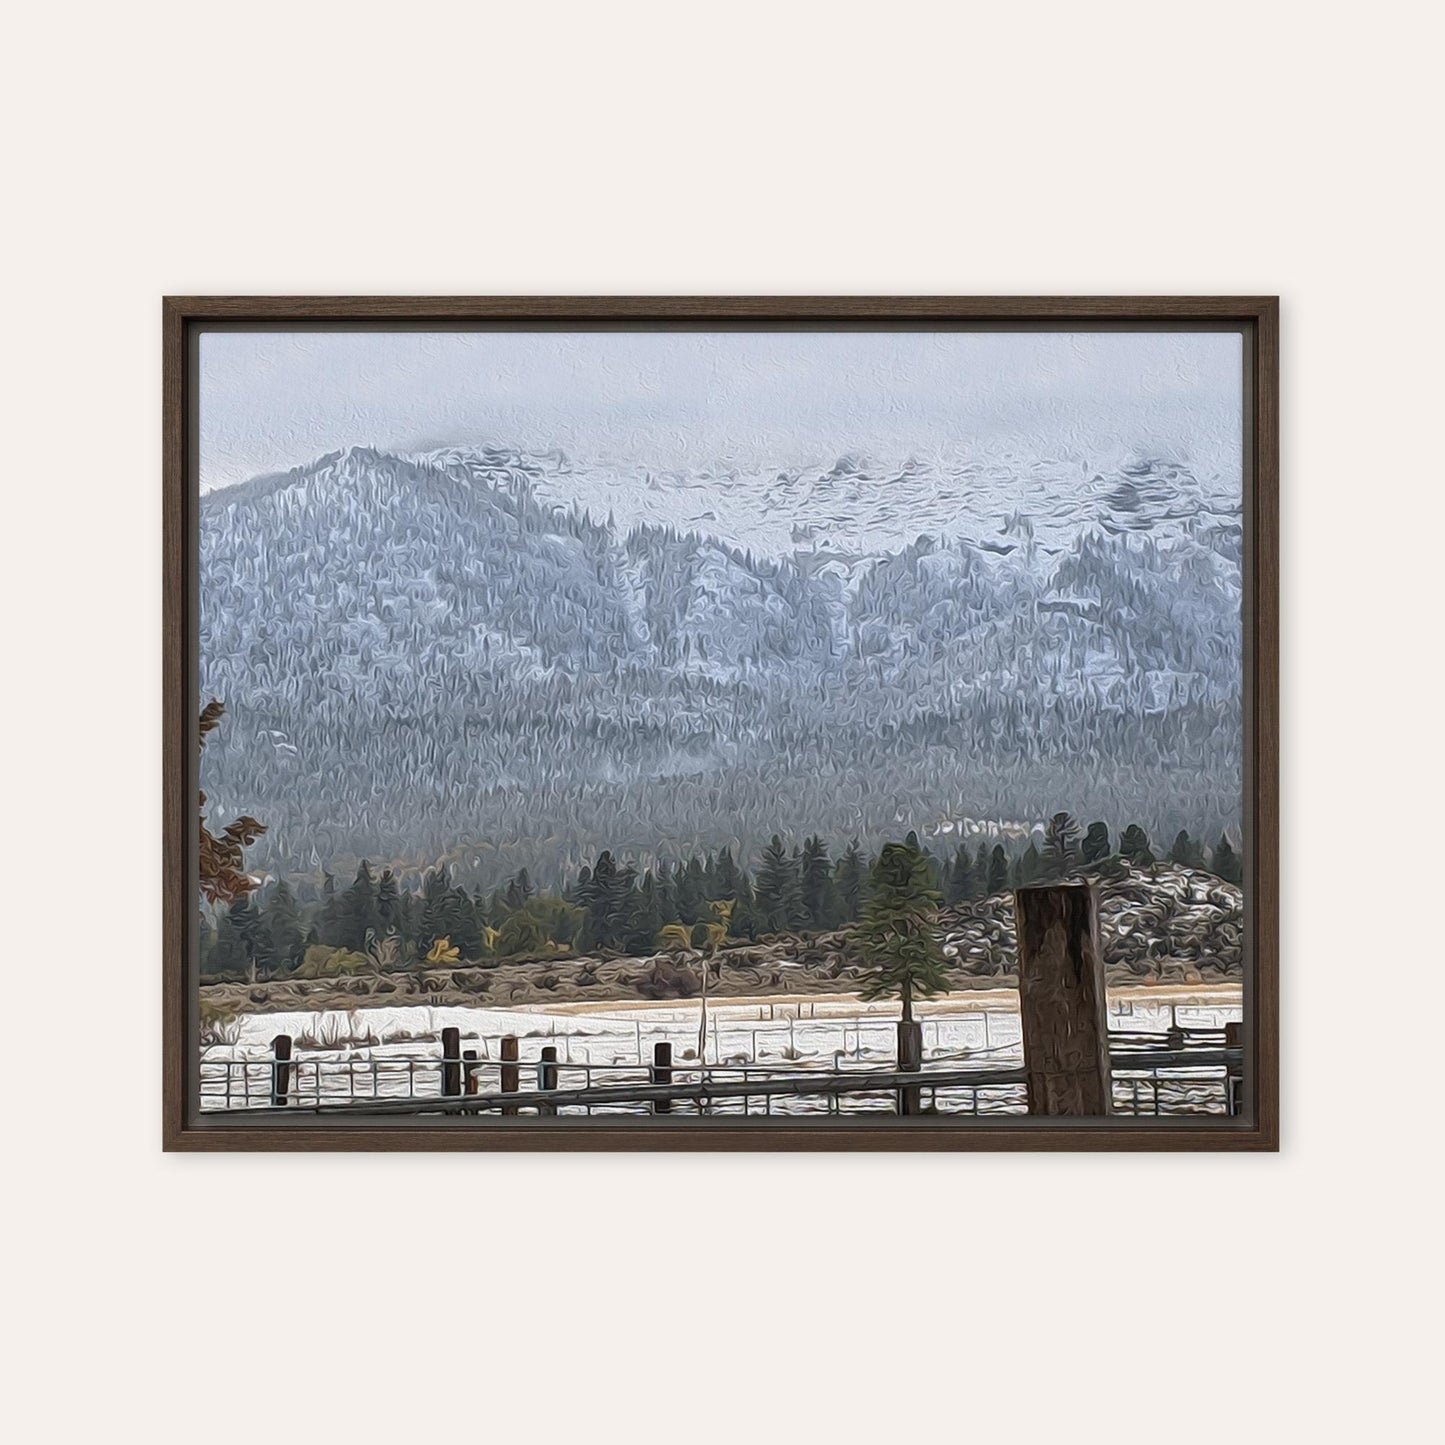 Out at The Ranch Framed Print